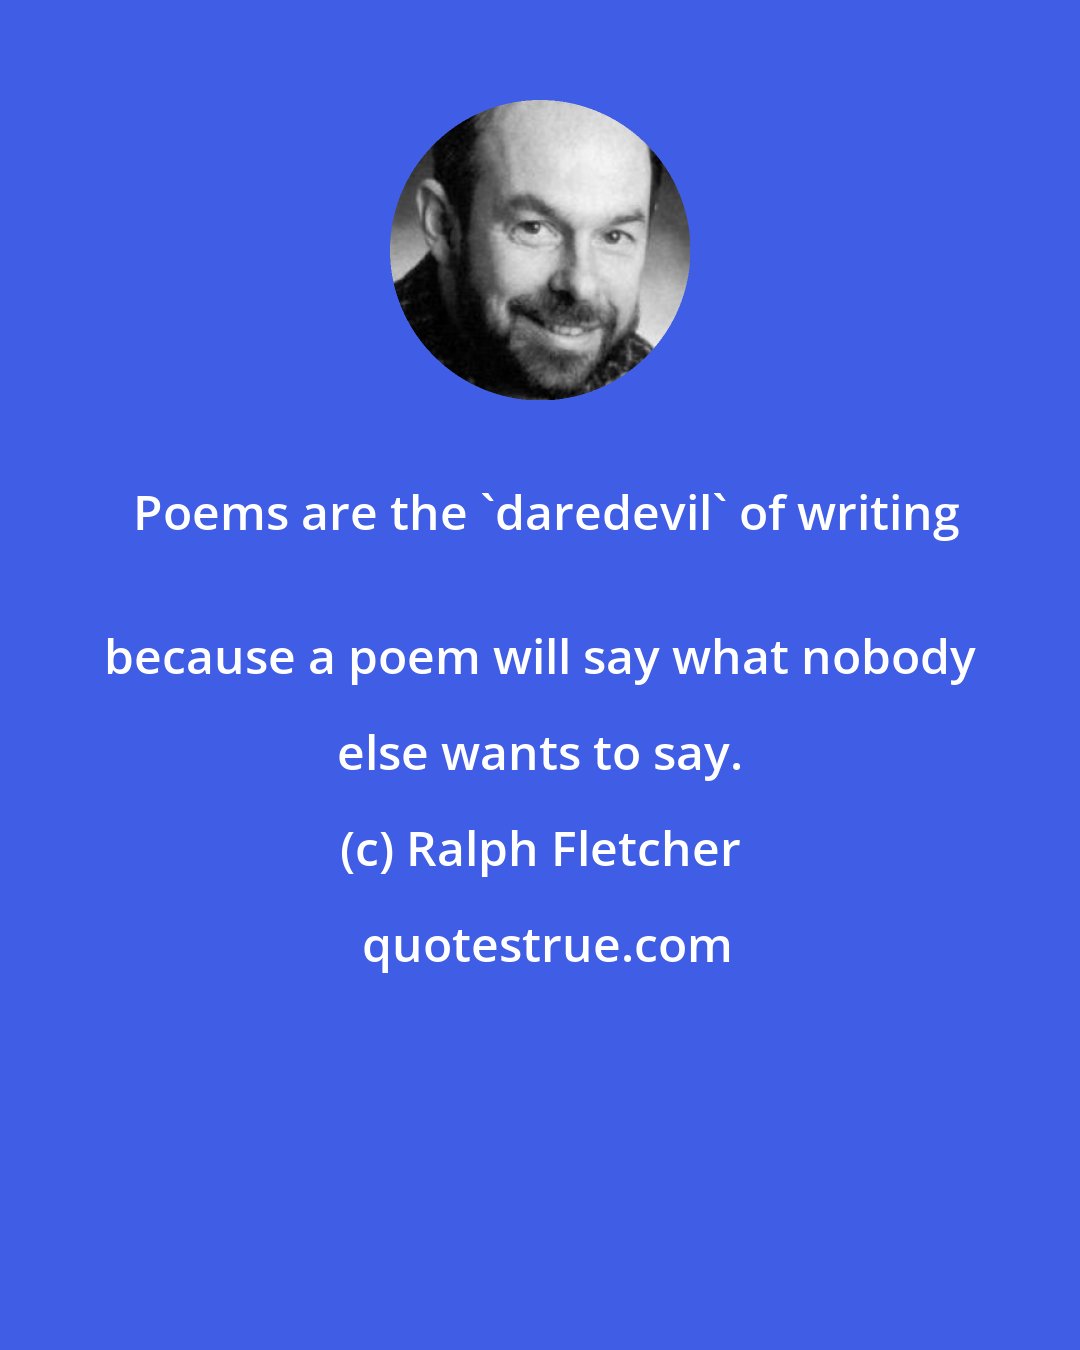 Ralph Fletcher: Poems are the 'daredevil' of writing
 because a poem will say what nobody else wants to say.